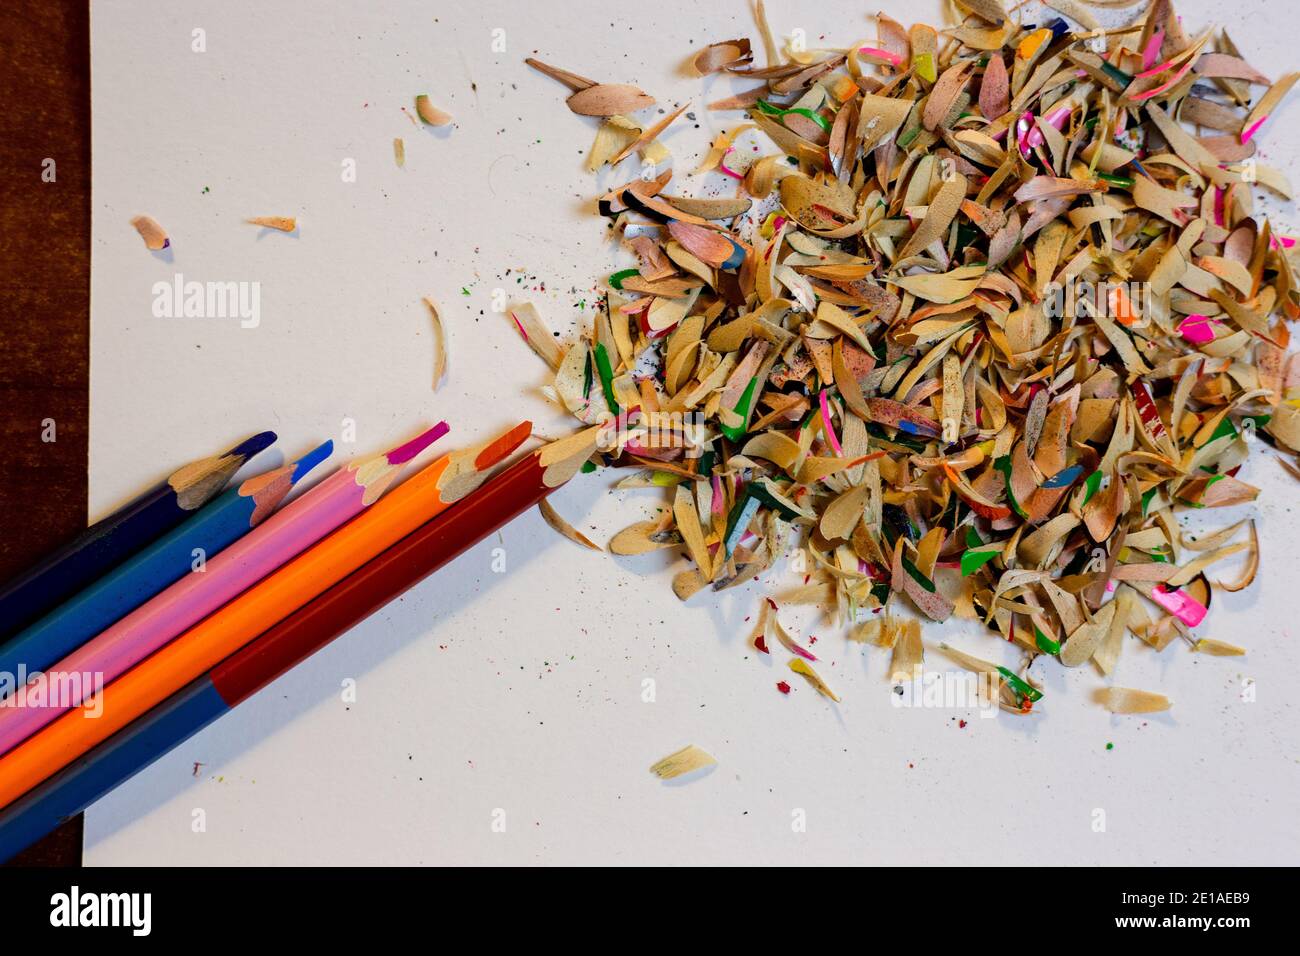 Colored pencils and shavings after sharpening pencils on a white sheet Stock Photo